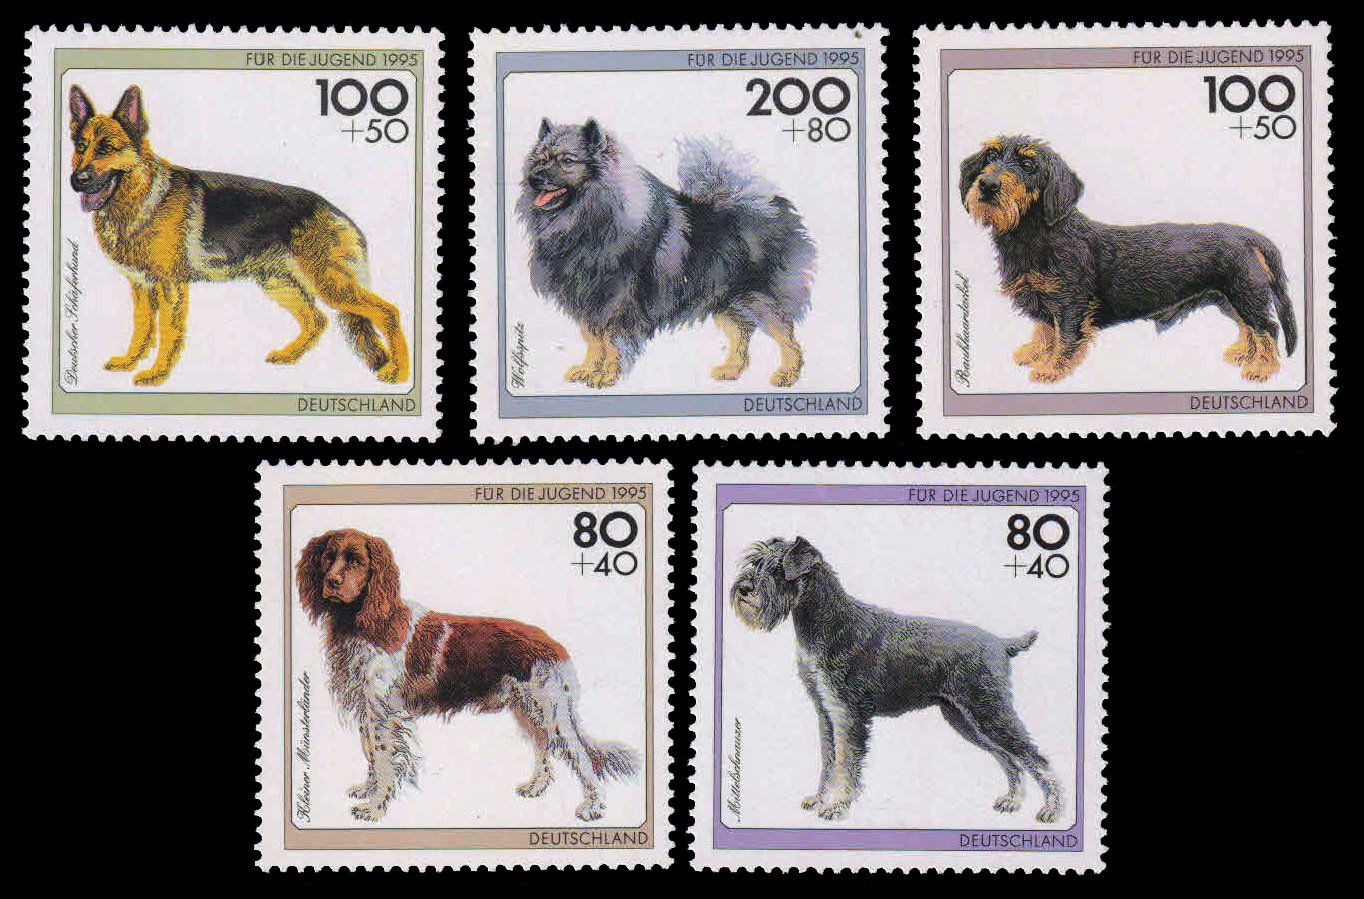 GERMANY 1995 - Dogs, Youth Welfare. Set of 5, MNH. S.G. 2640-44. Cat £ 13.35